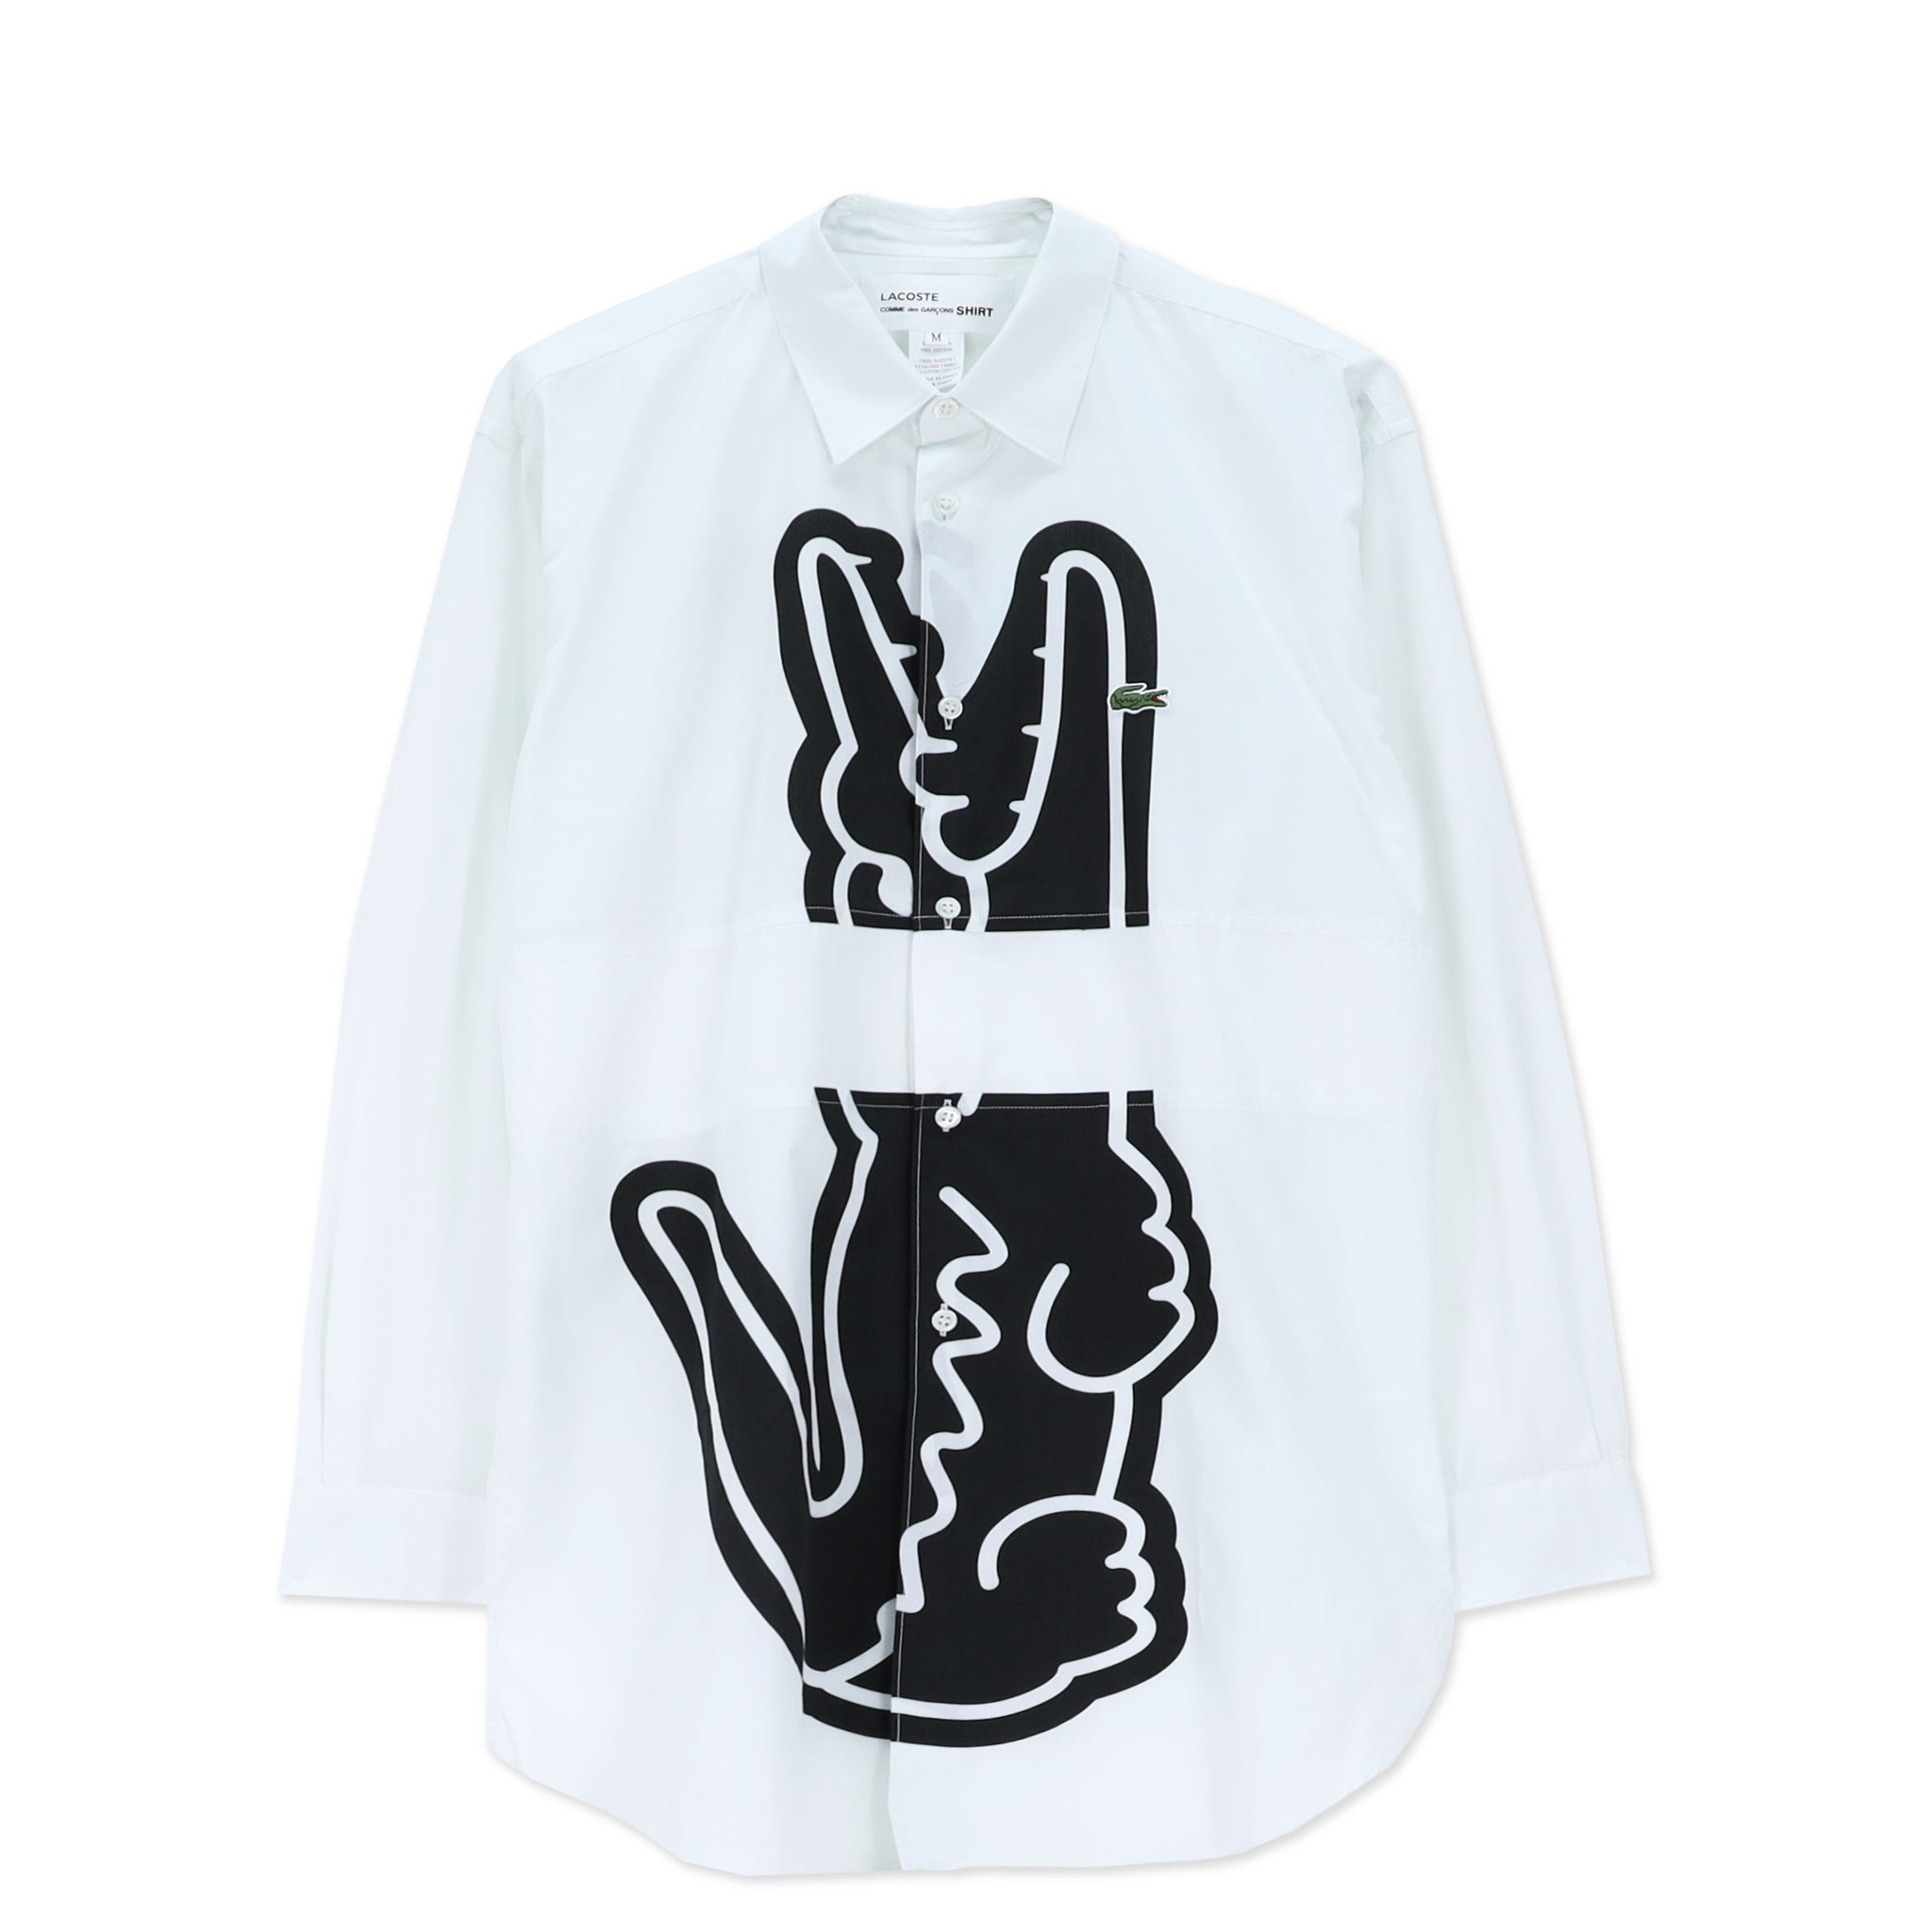 Lacoste Black and White Stencil Print Panel Shirt